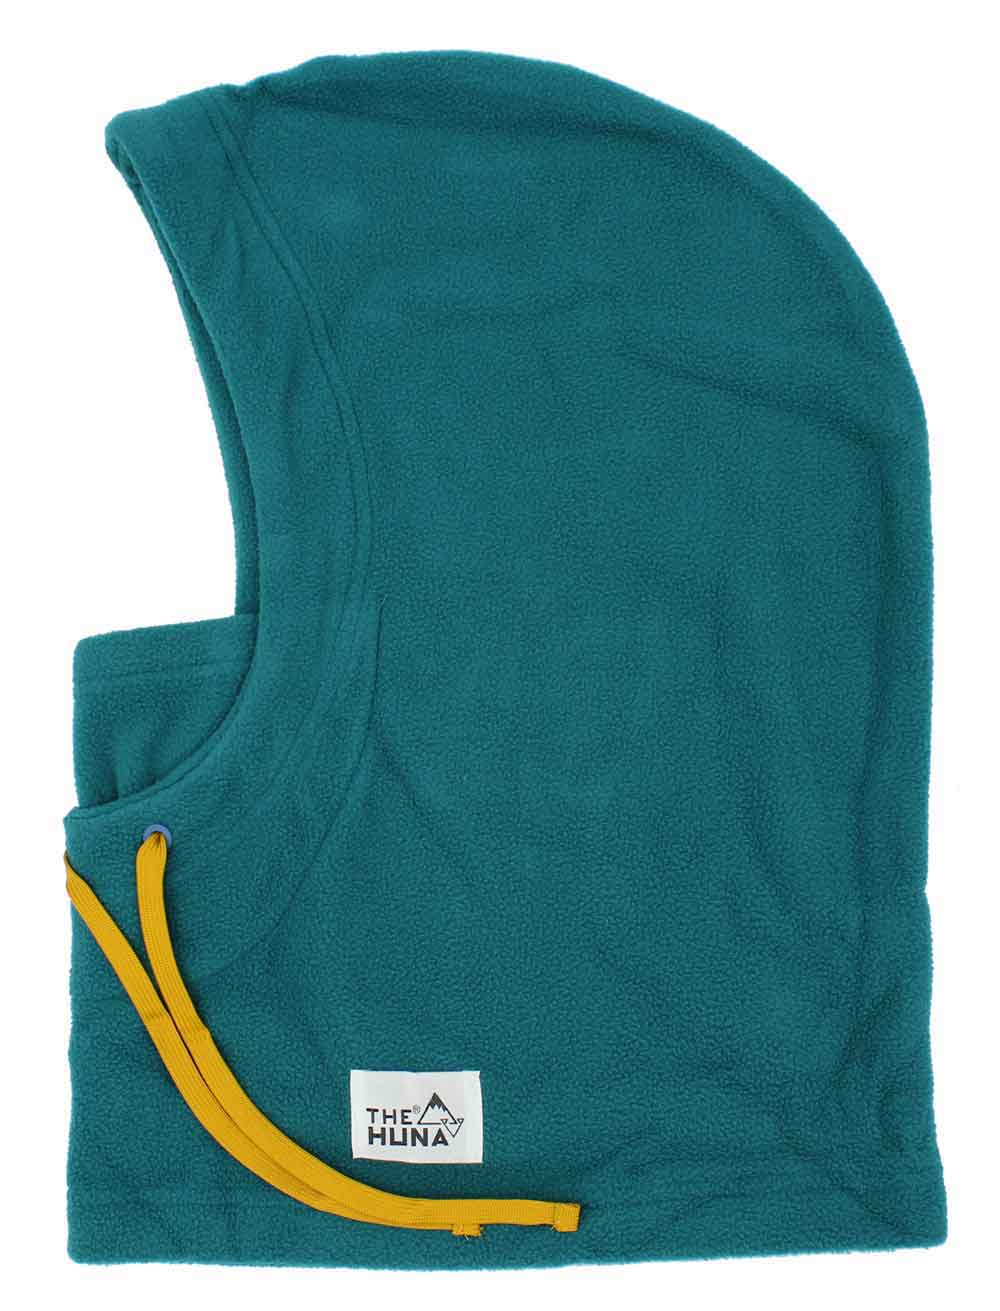 Blue Teal with Gold Strings - Normal Fleece